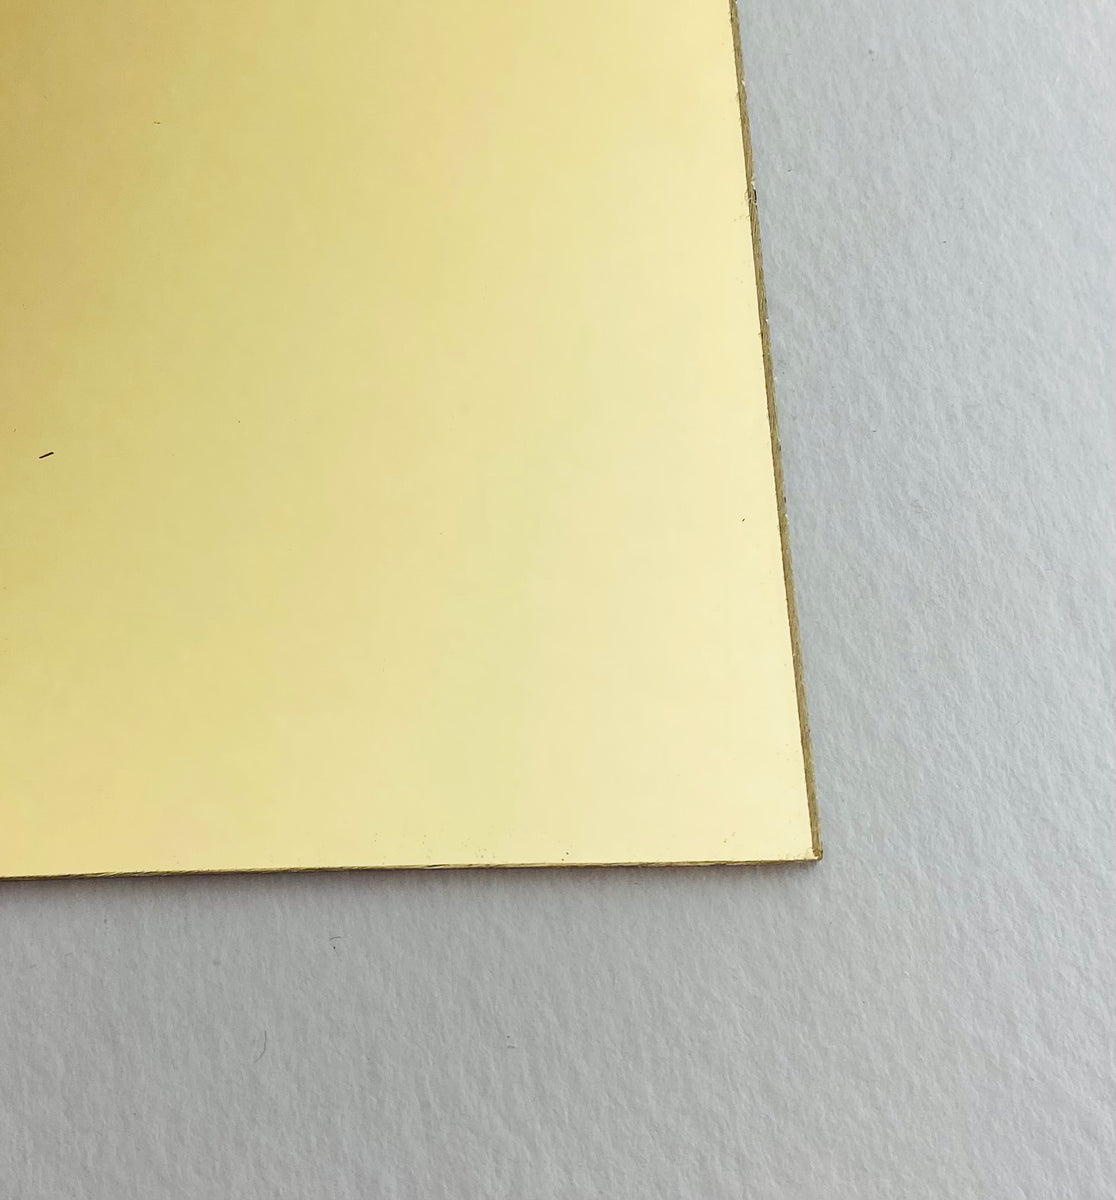 Mirror Acrylic Sheet for laser Cutting Gold Glitter Iridescent –  AcrylicMeThat